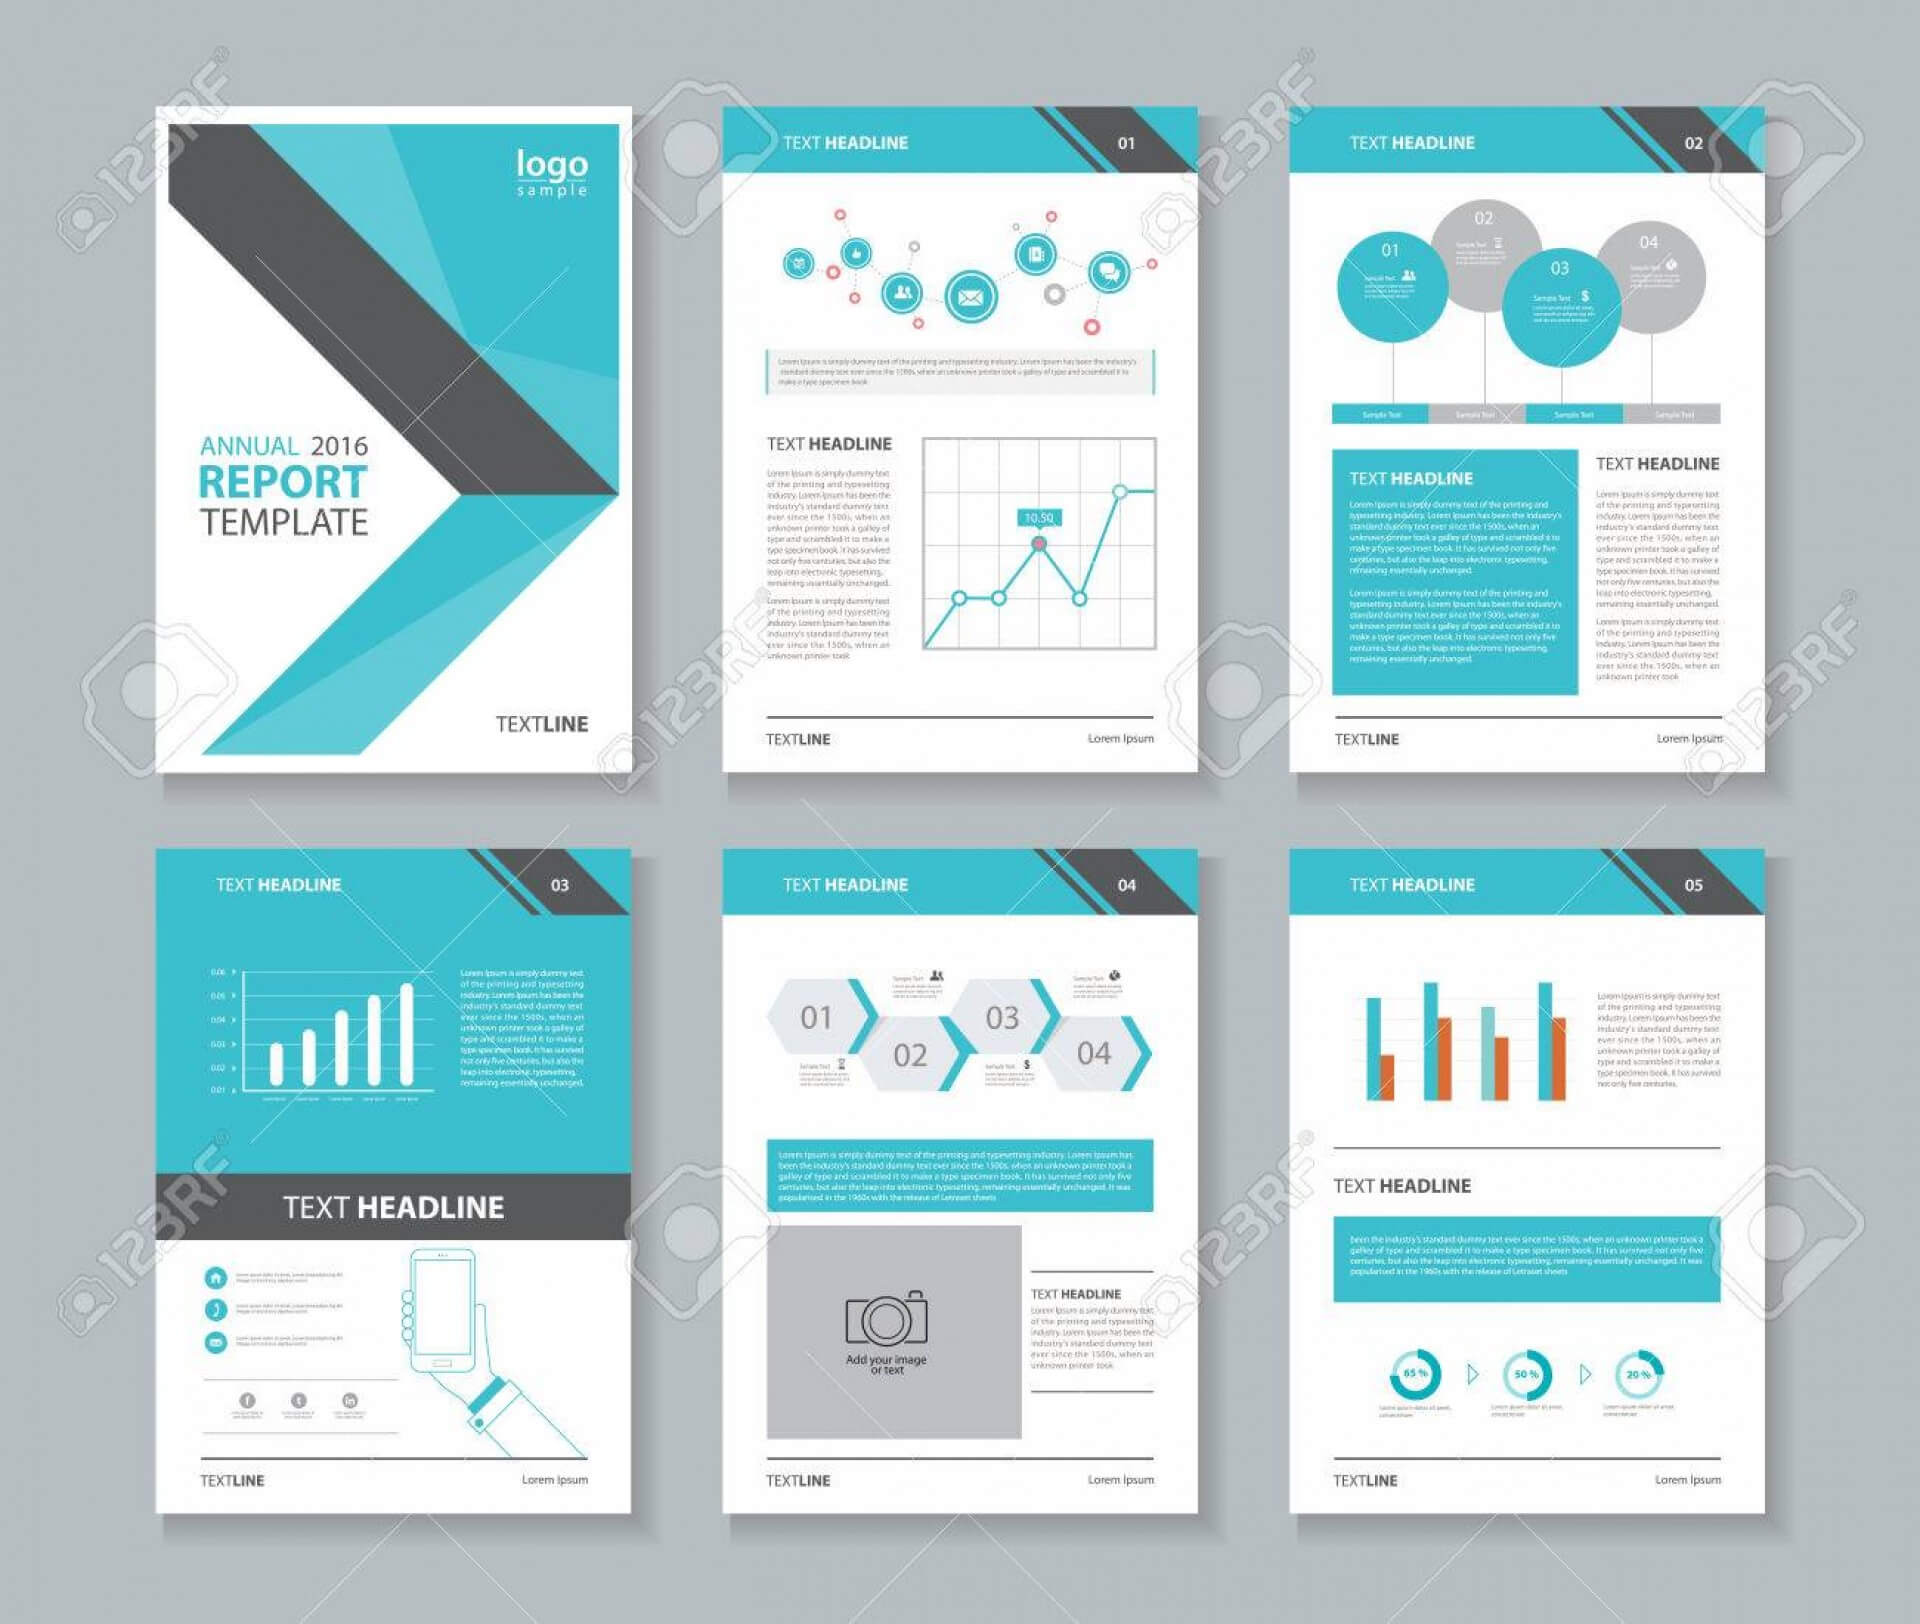 025 Free Annual Report Template Frightening Ideas Microsoft Inside Annual Report Word Template